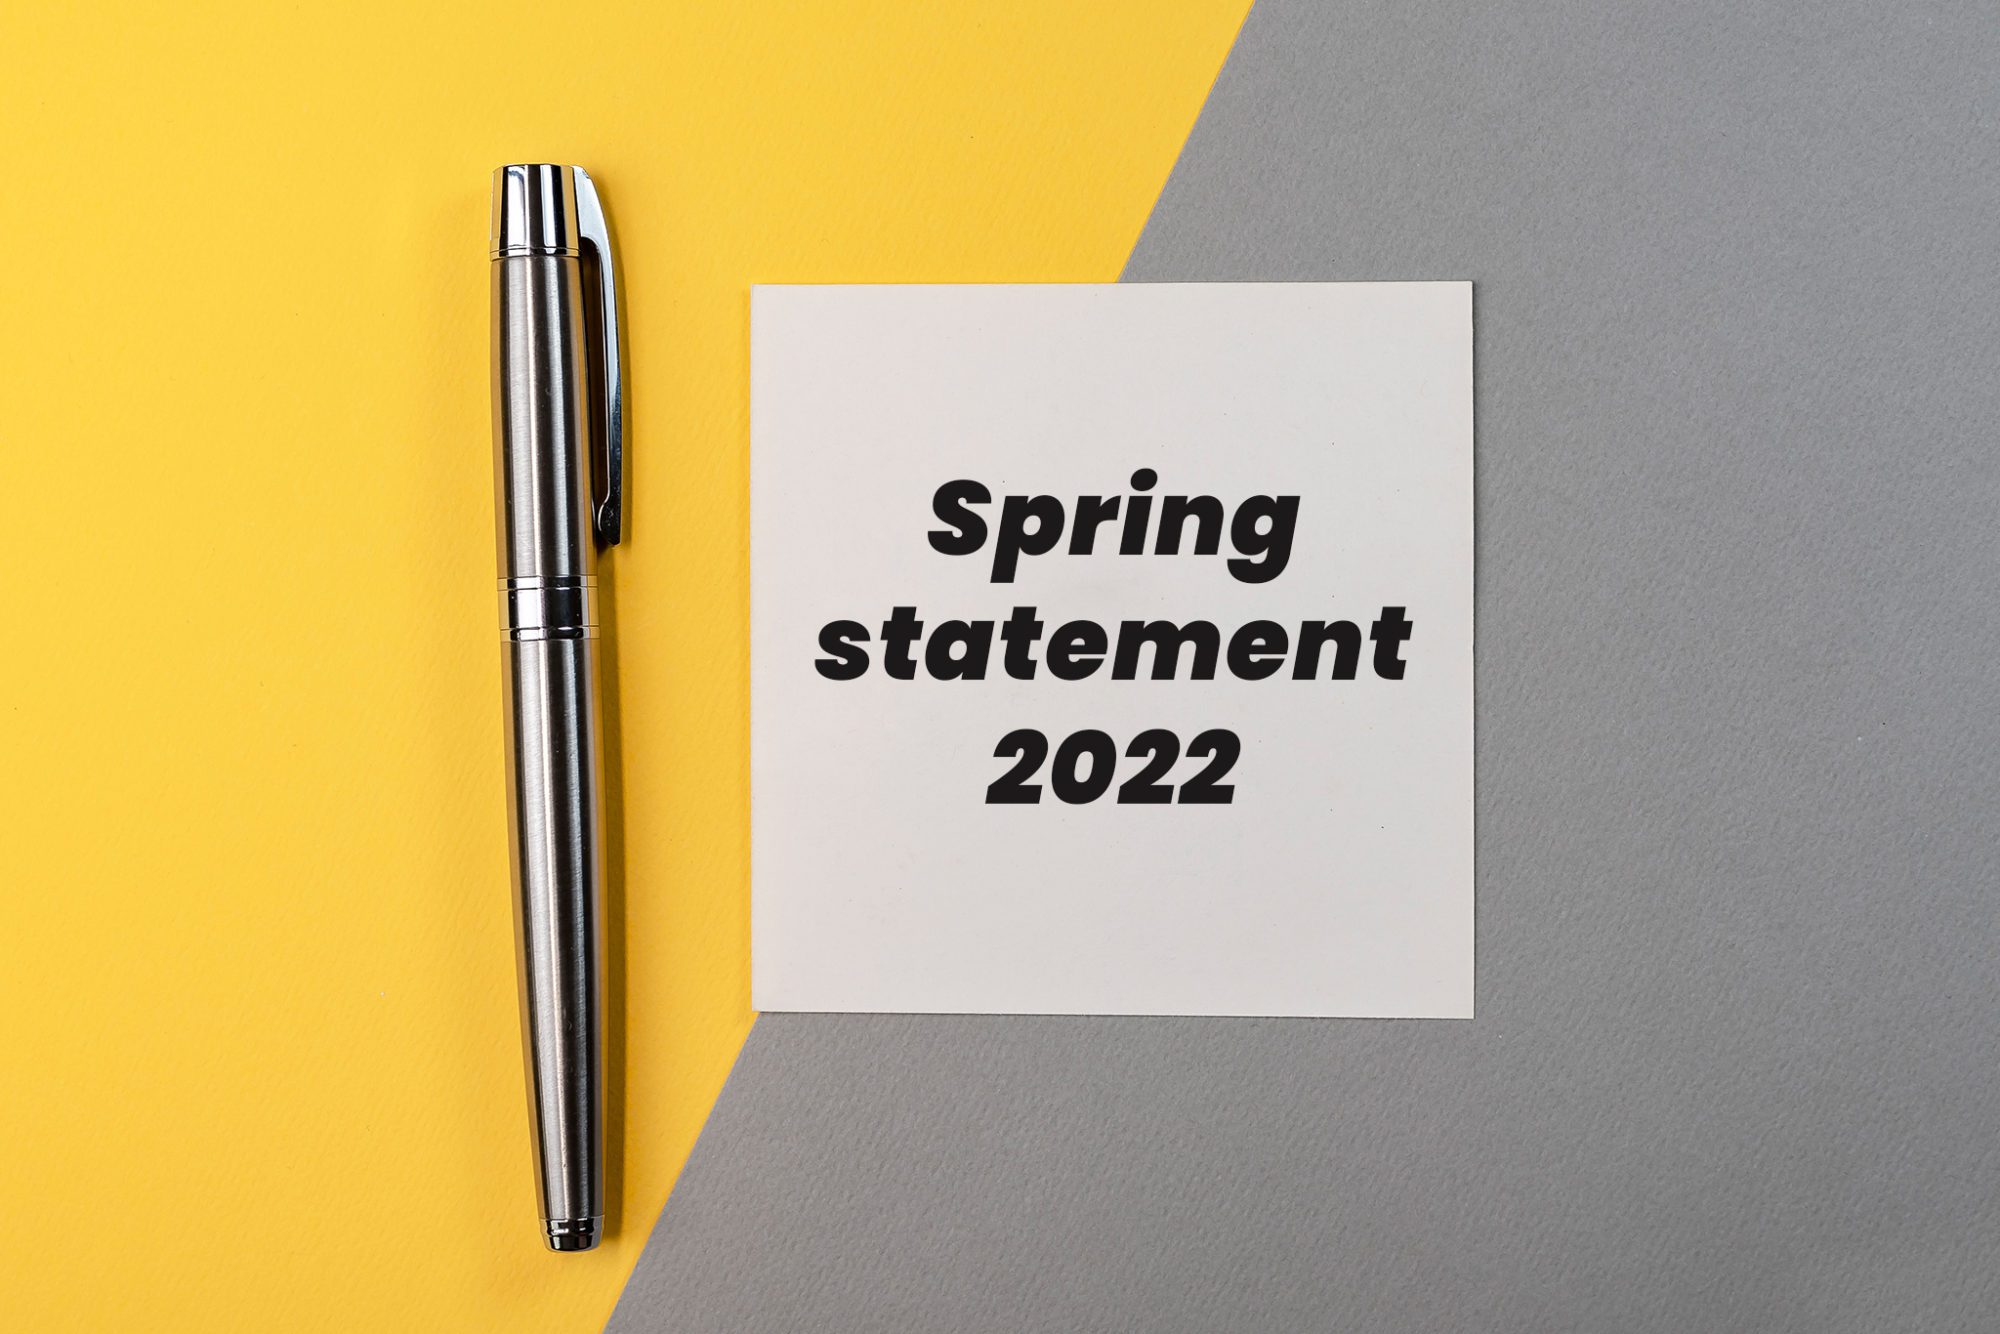 Spring statement 2022: Key points to note